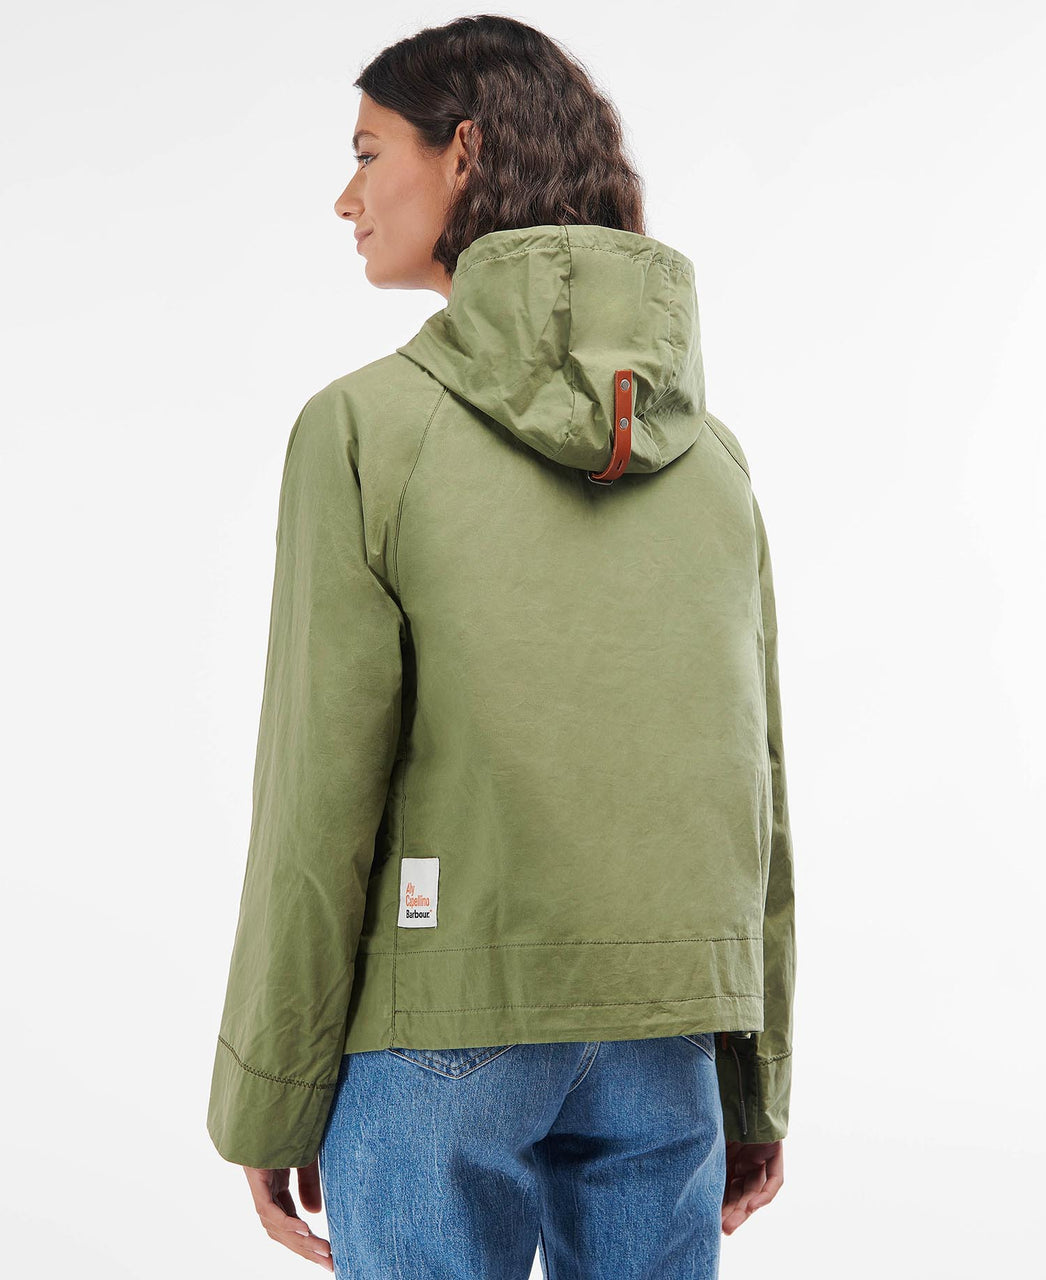 Ally Capellino x Barbour Tip Waxed Cotton Jacket in Army Green